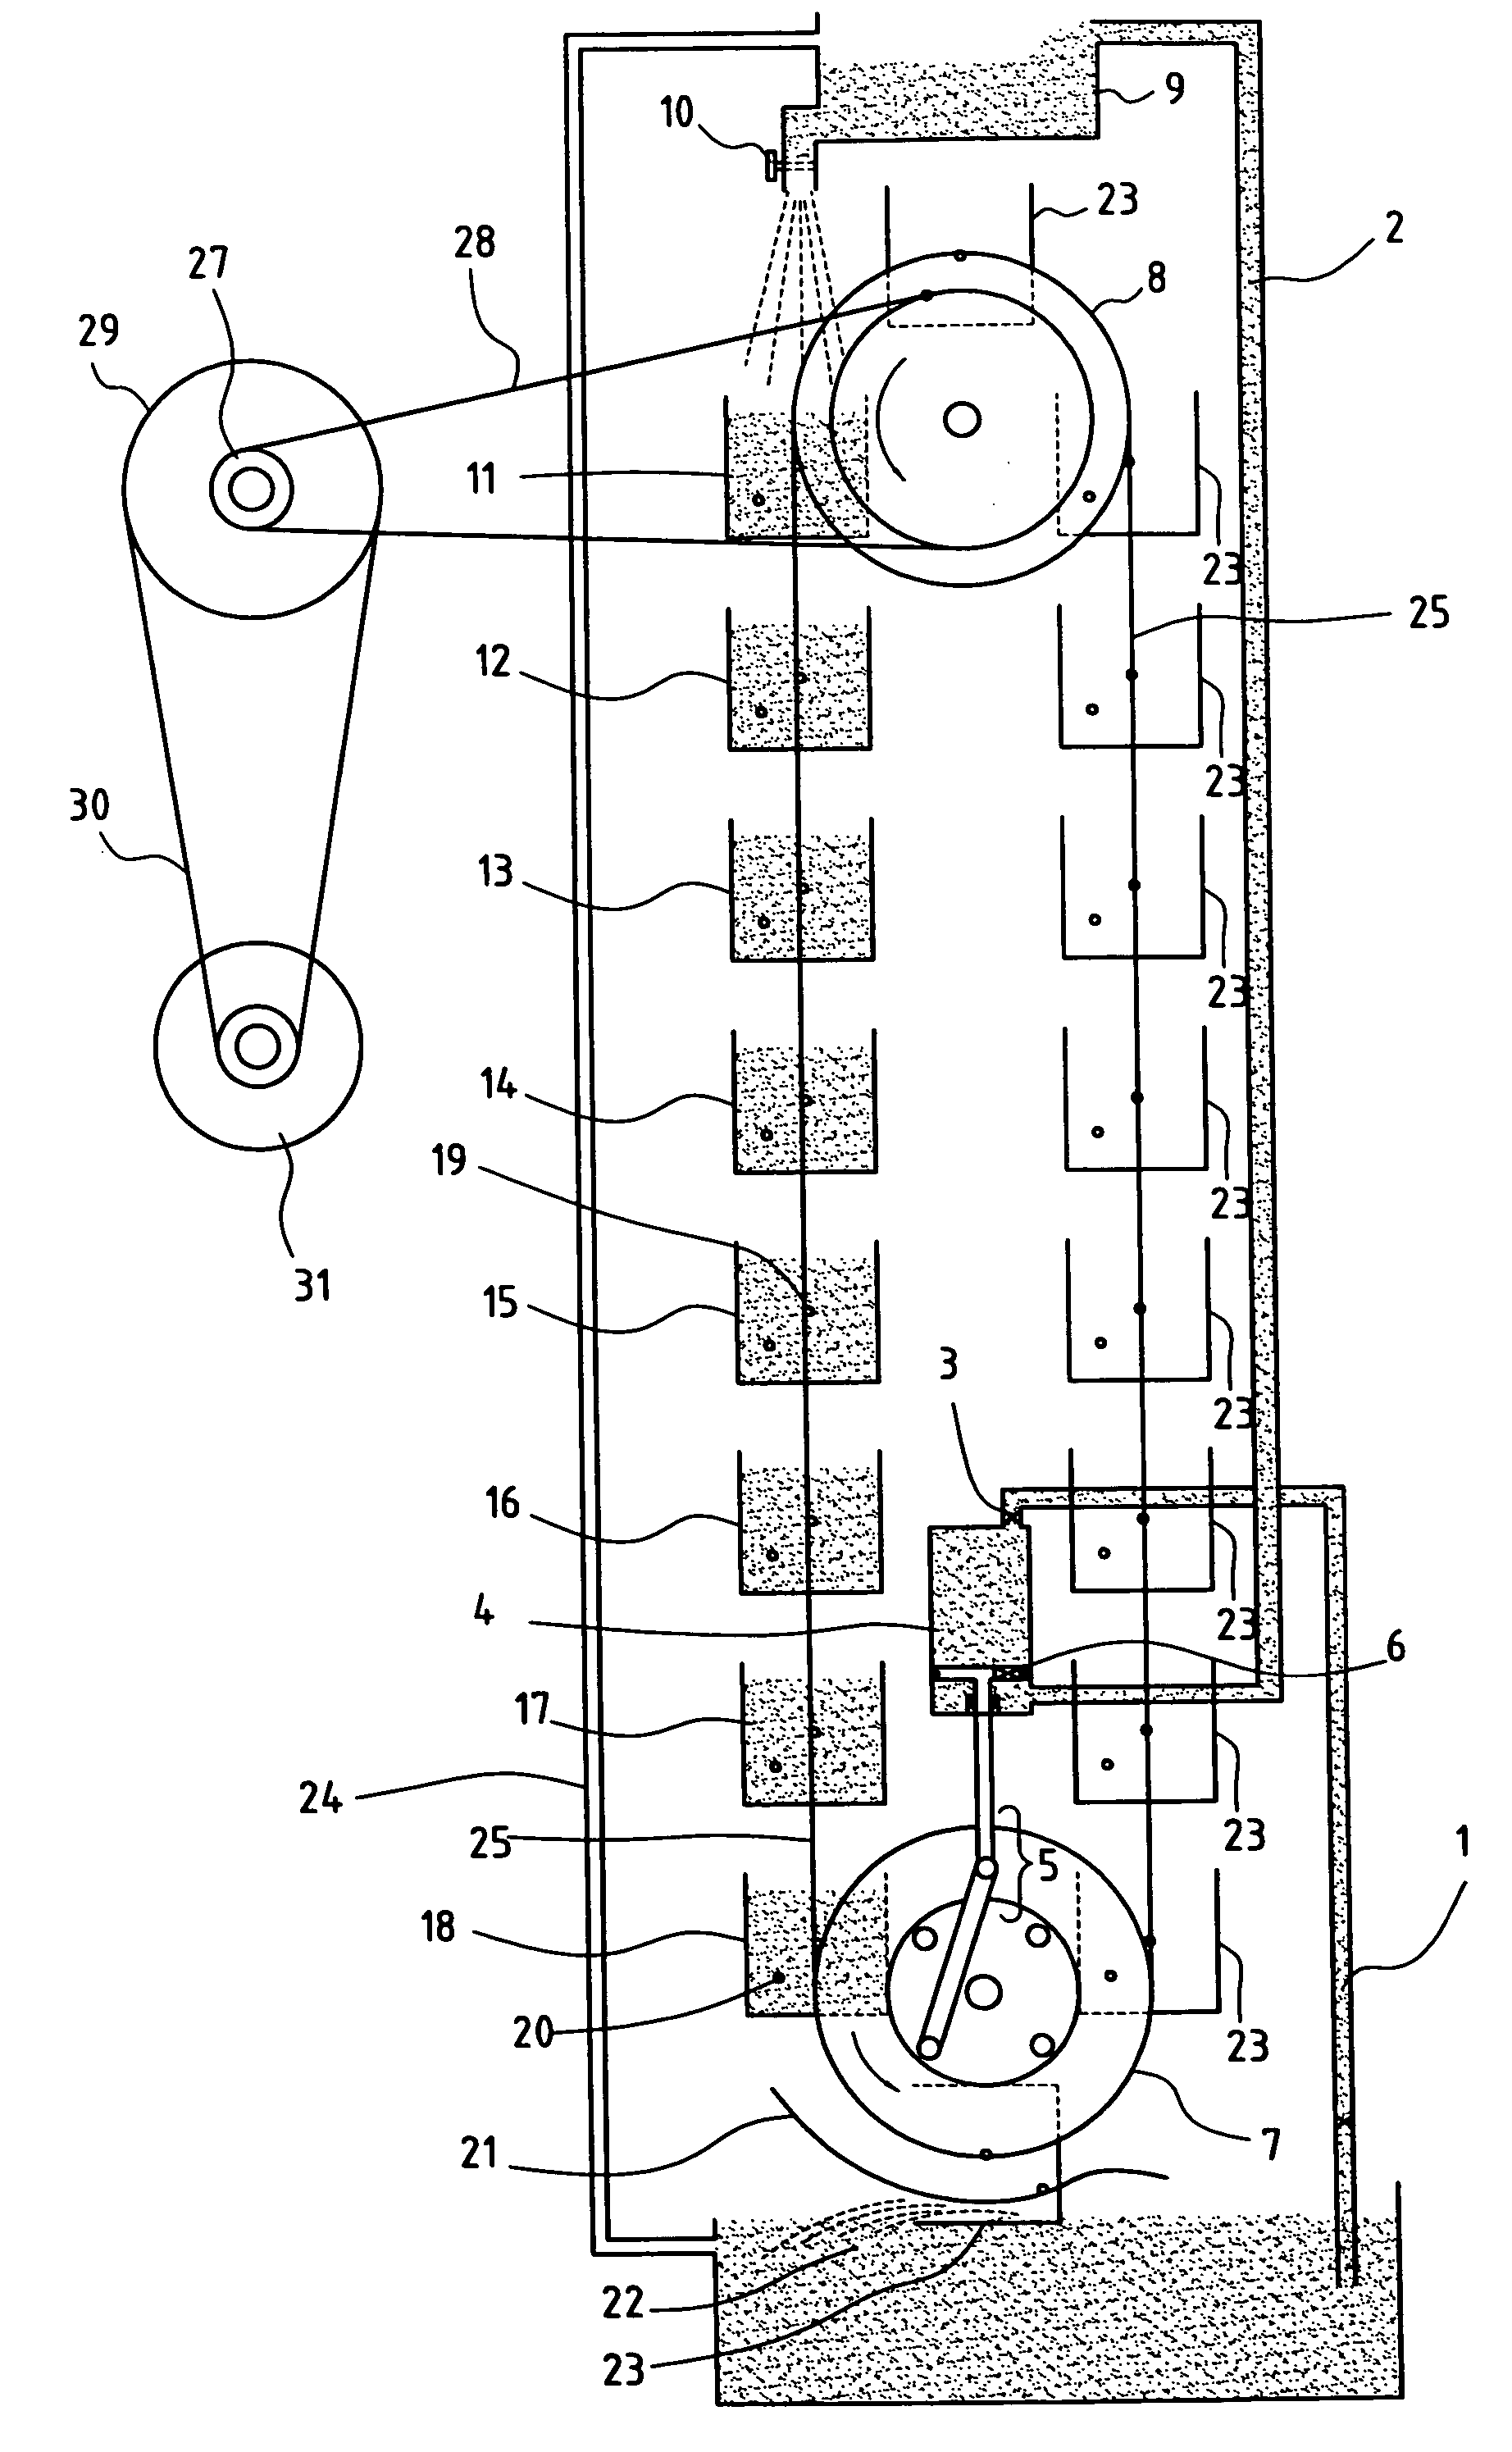 Hydraulic power generation system based on water pumping by weight of water